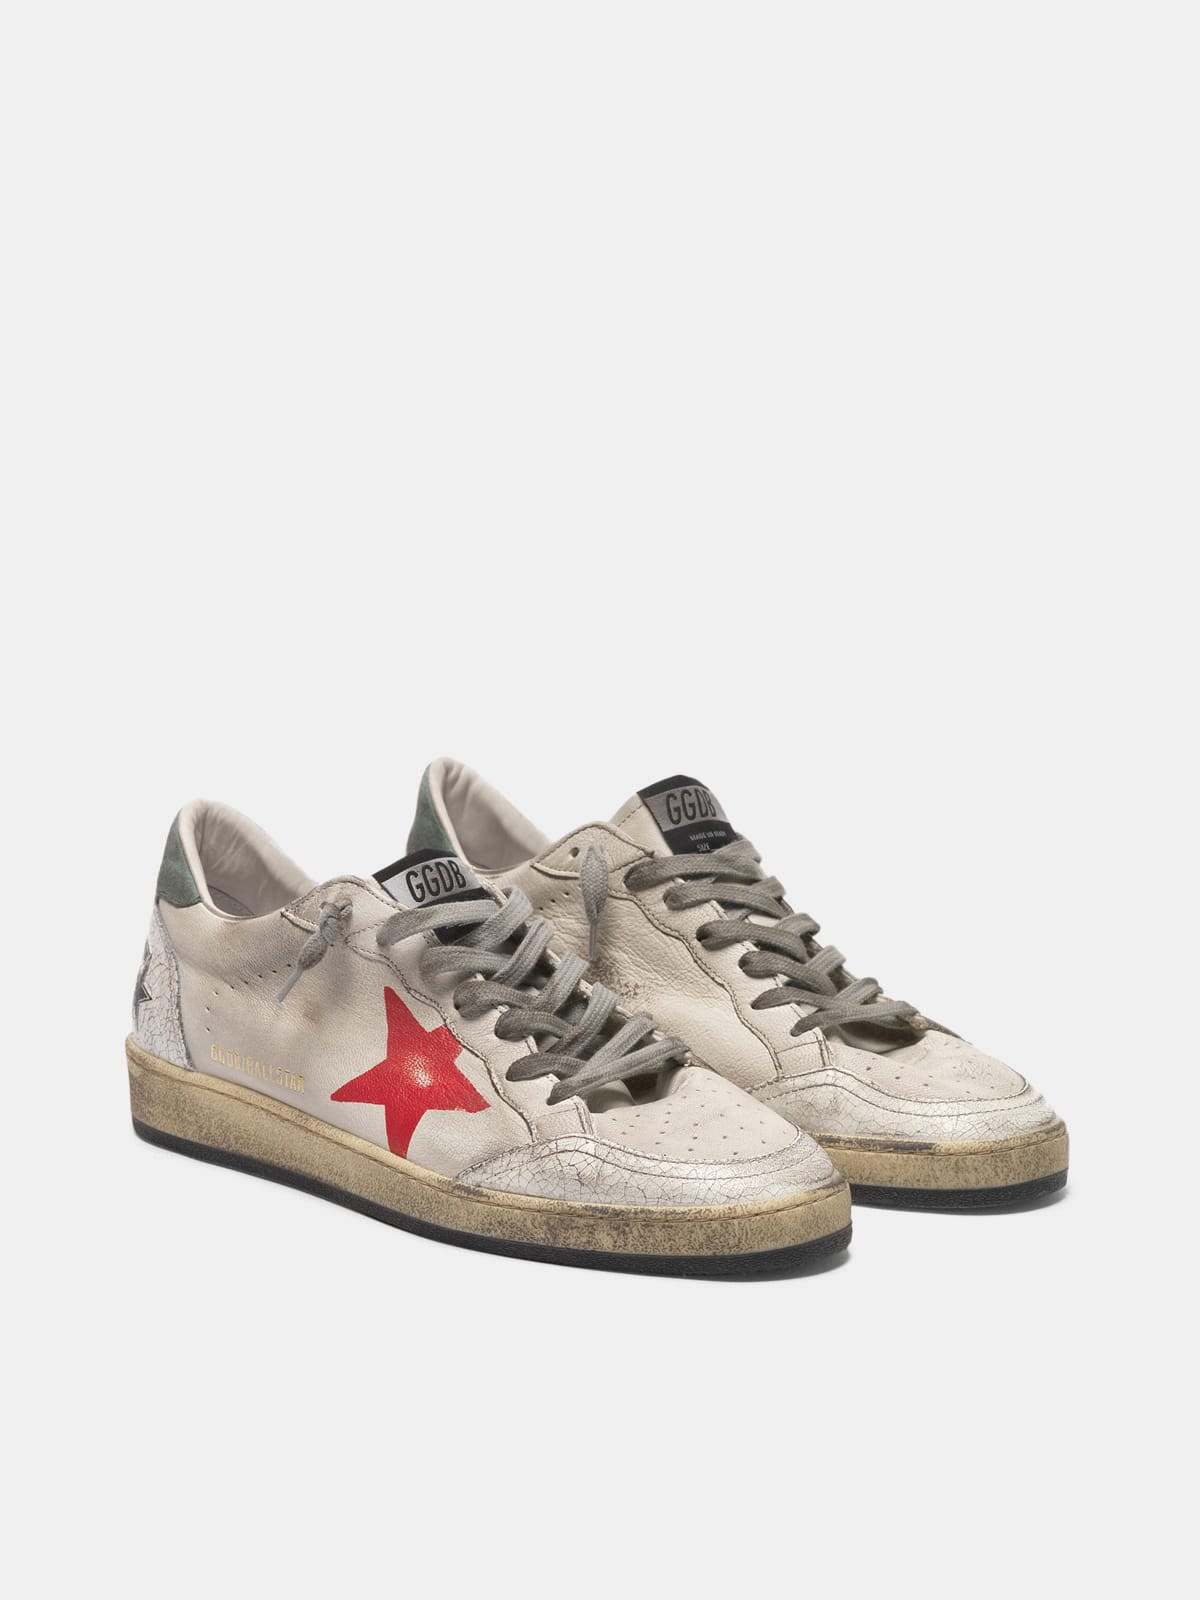 Ball Star sneakers in crackle leather with hand-painted red star